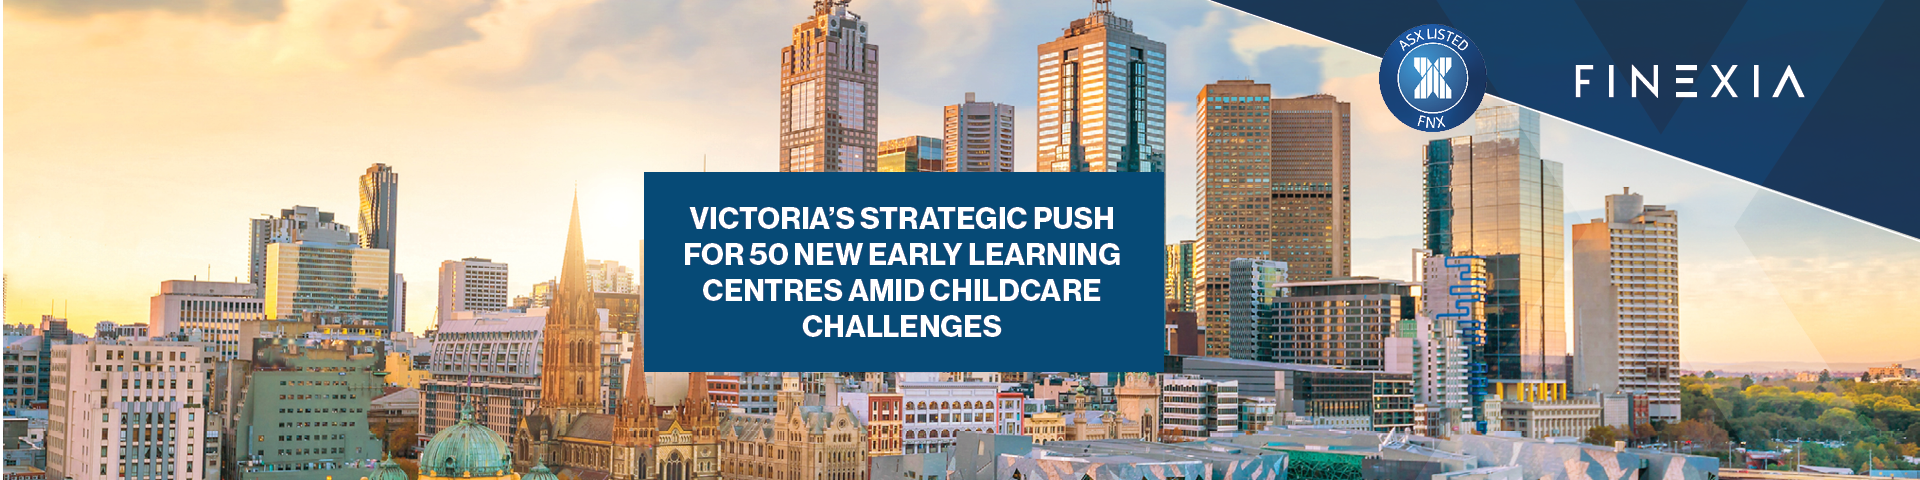 Victoria’s Strategic Push for 50 New Early Learning Centres Amid Childcare Challenges